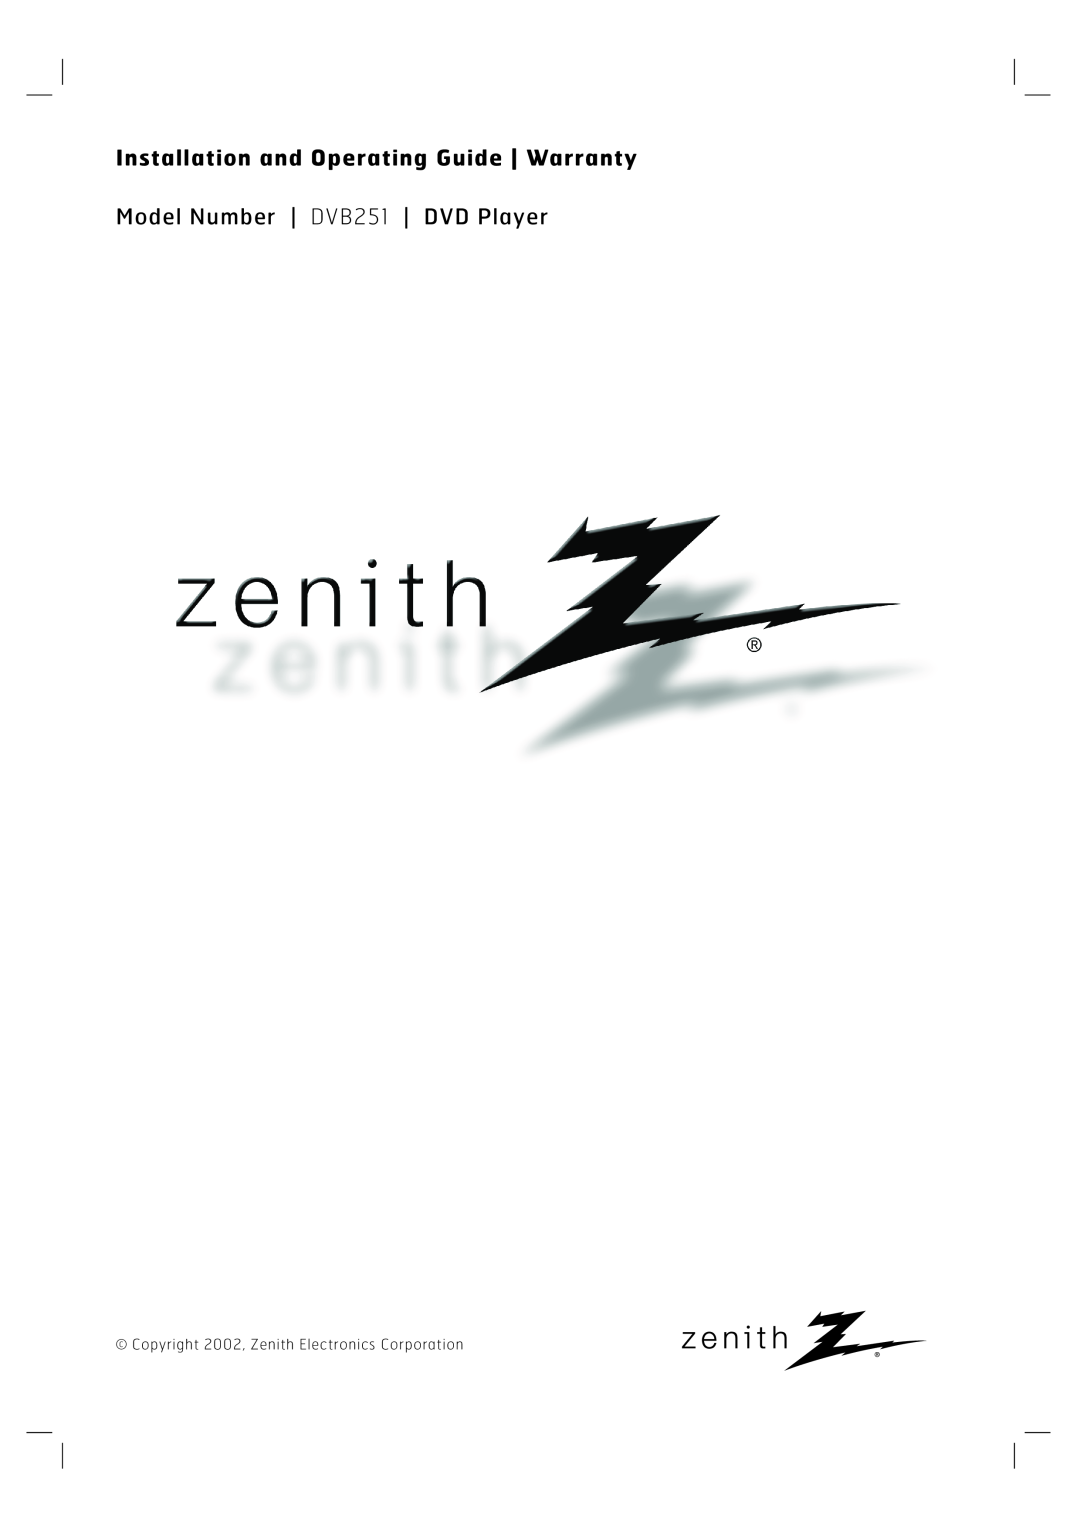 Zenith warranty Installation and Operating Guide Warranty, Model Number DVB251 DVD Player 